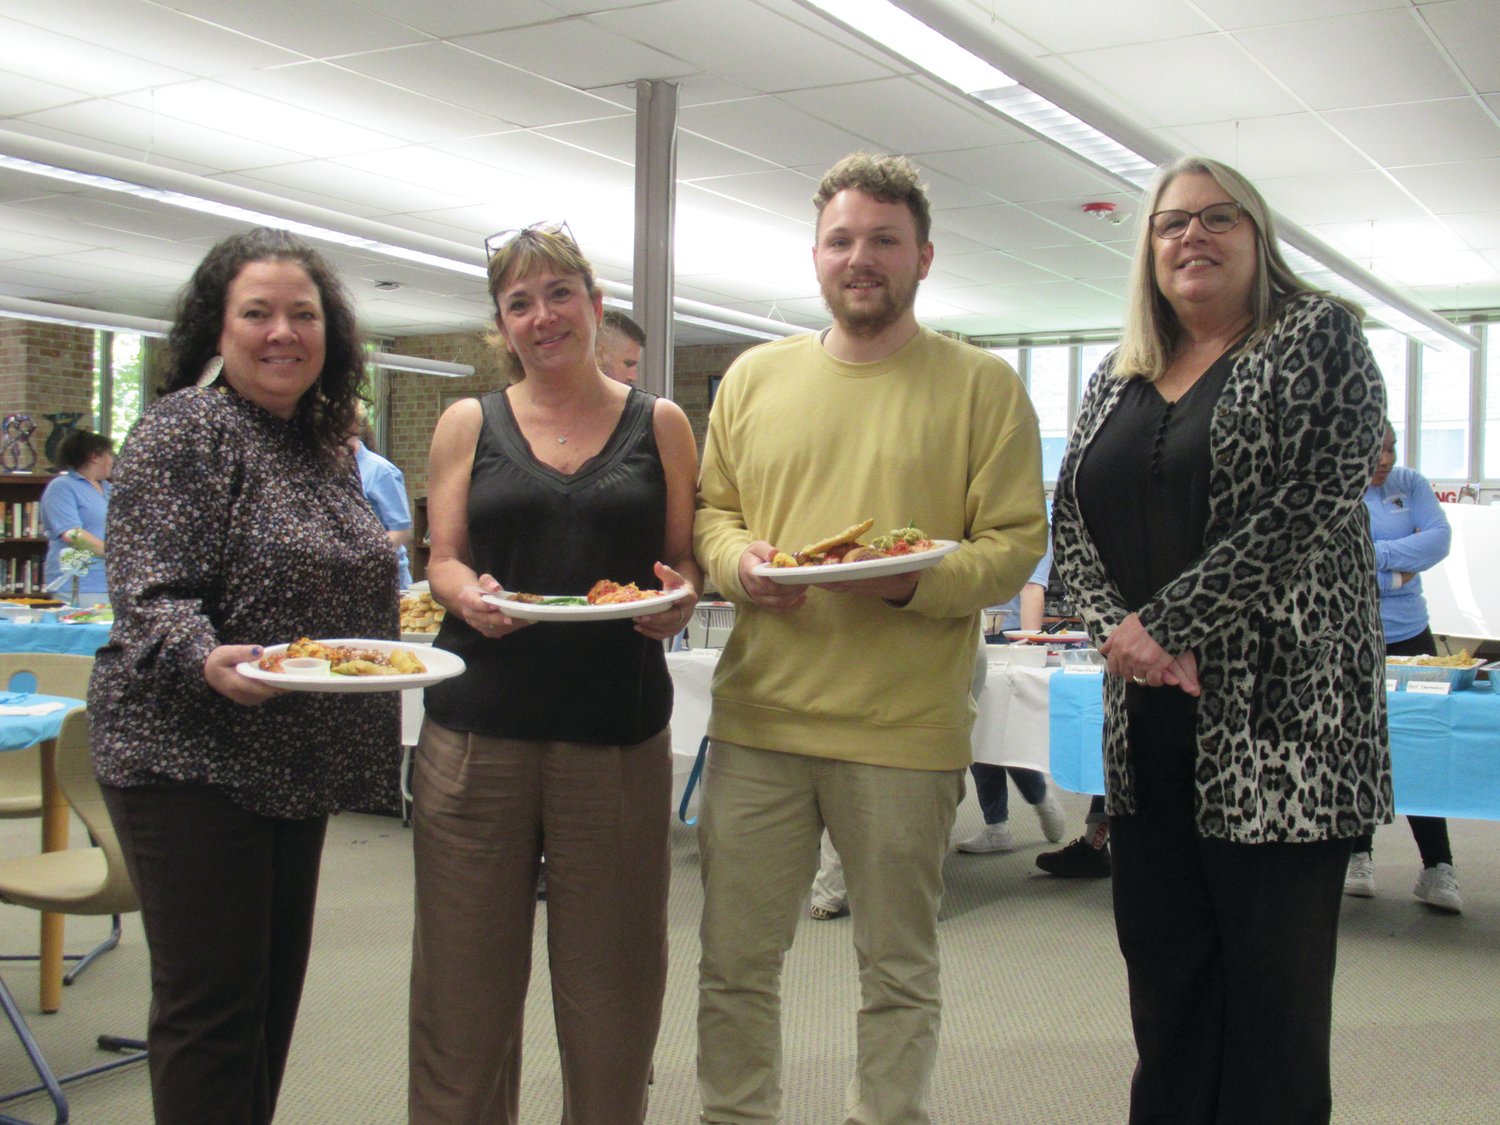 DELIGHTED DINNERS: Teachers Kerry Murphy, Debra Smyth and Mike Harwood join Principal Dr. Donna Pennachia with the plates of “fantastic foods” they selected from a display of 22 homemade items during last week’s Teacher Appreciation Luncheon.